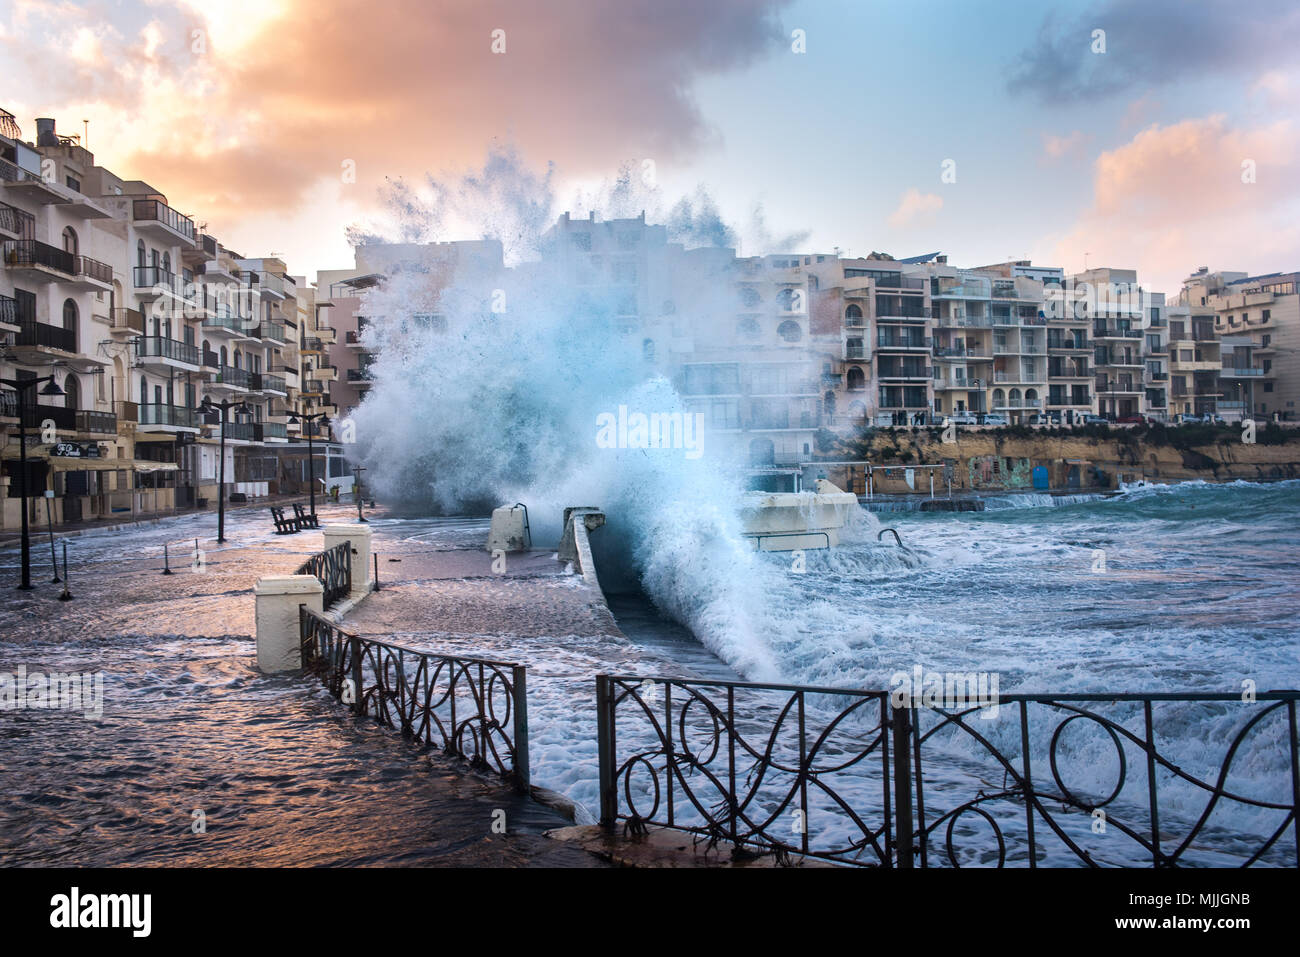 Marsalforn, Malta - January 2, 2018: Big waves are crashing into the Marsalforn promenade. The village of Marsalforn is on the north caost of Gozo, which is an island of the Maltese archipelago and the second-largest island of Malta. Stock Photo